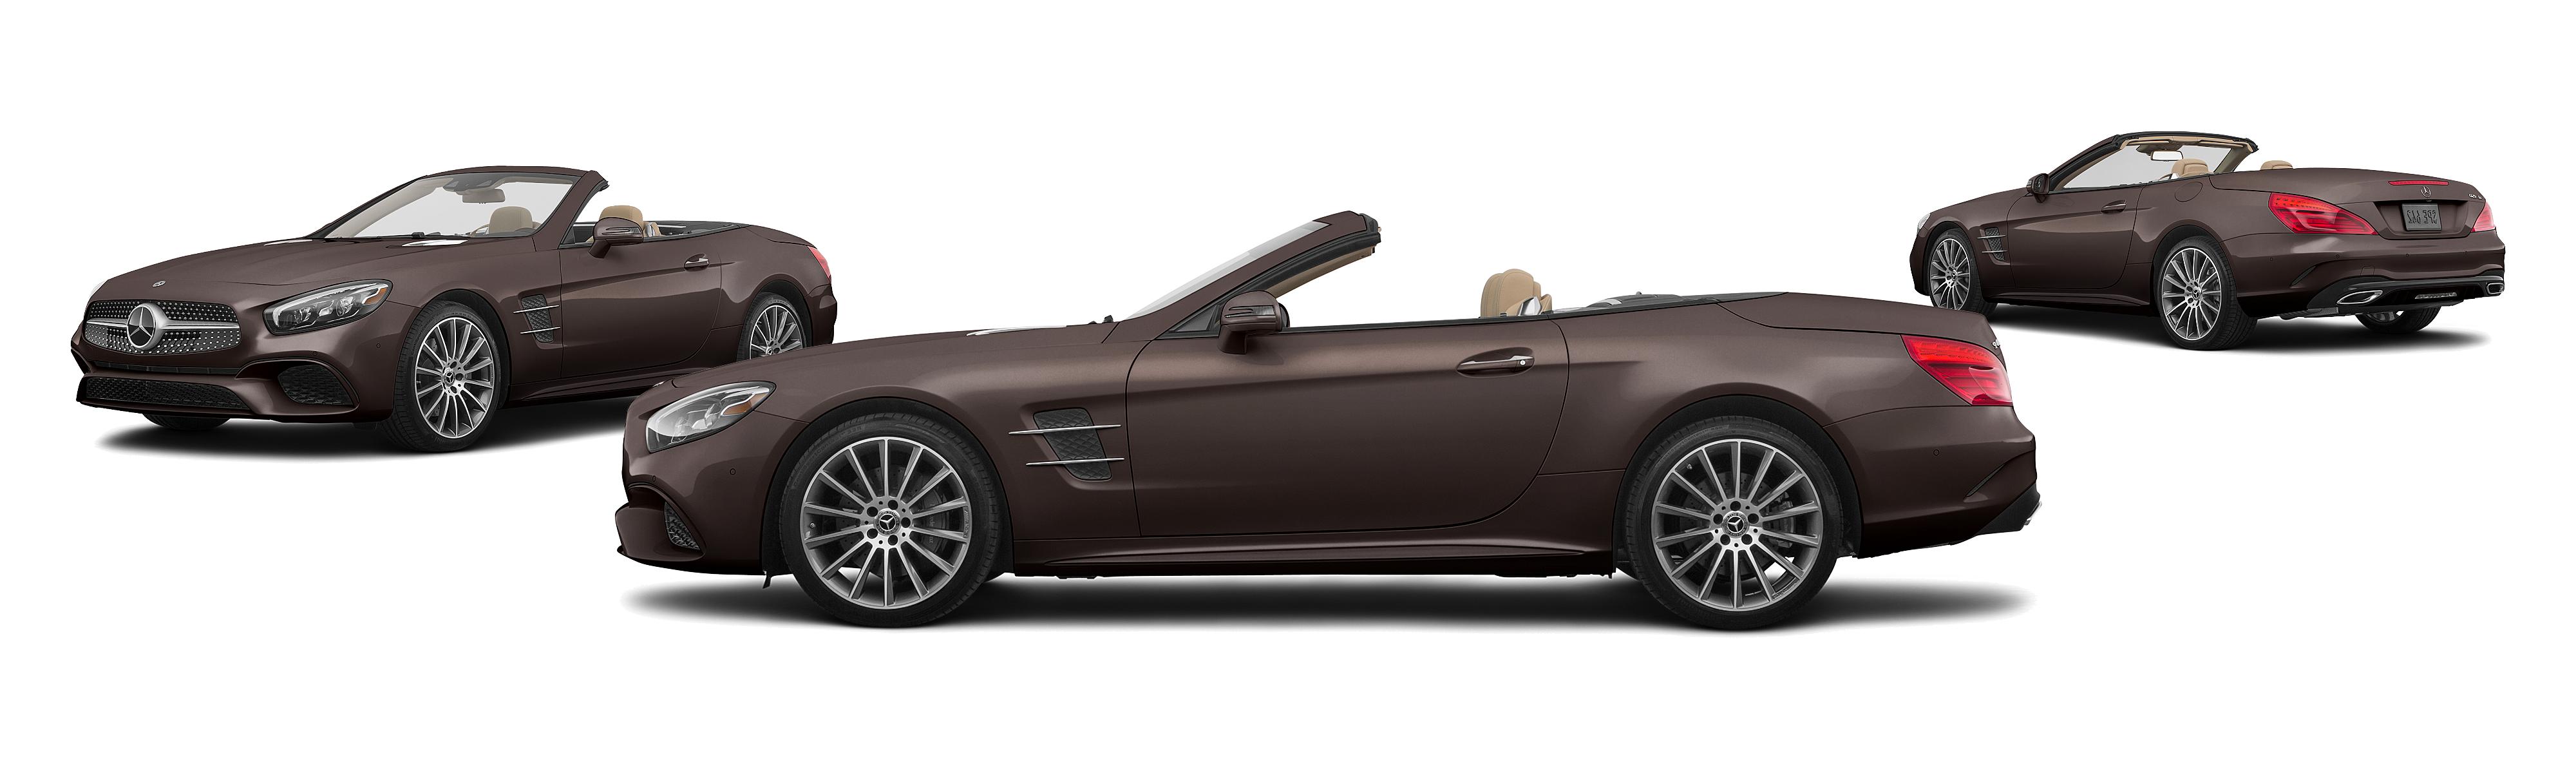 2018 Mercedes-Benz SL-Class SL 450 2dr Roadster - Research - GrooveCar